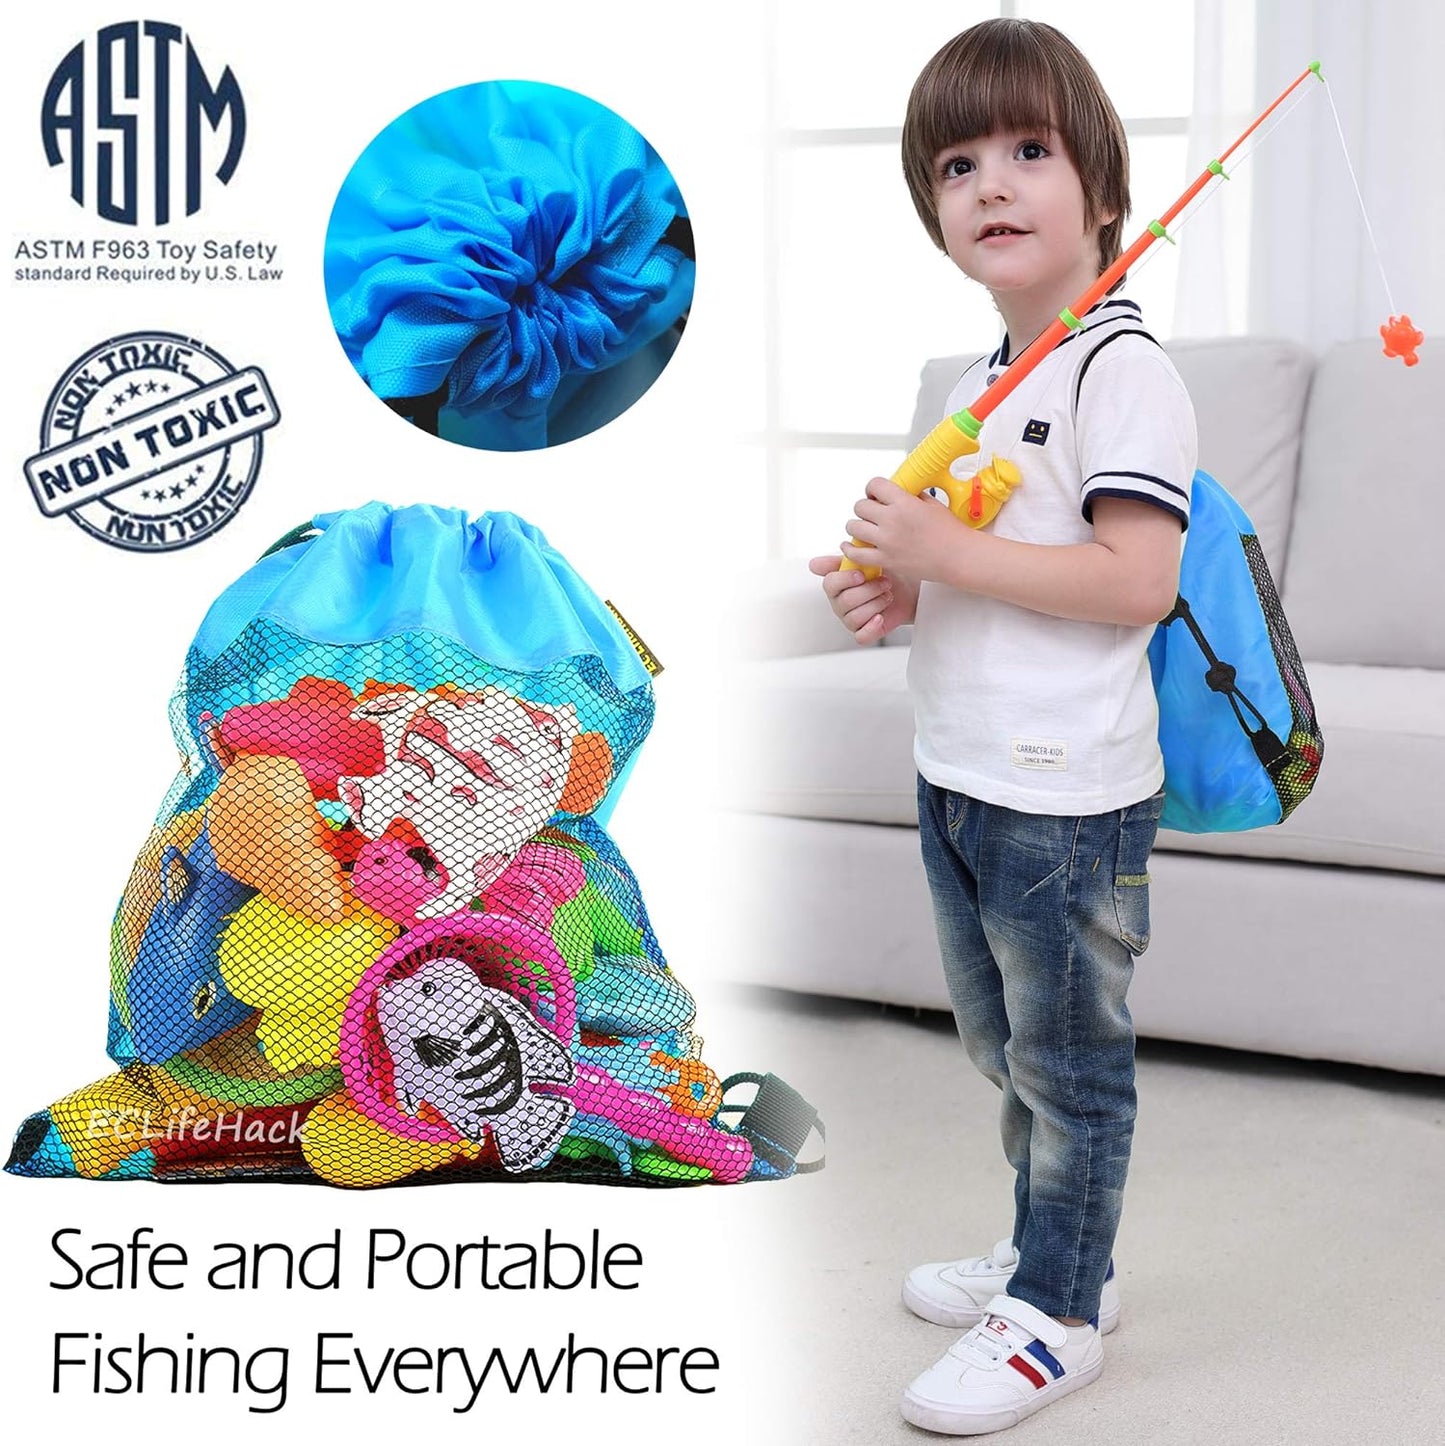 CozyBomB™ Magnetic Fishing Game for Kids | Bath Pool Toys Set for Water Table Learning Education Fishin for Bathtub Fun with Animal, Poles Rod Net Fishes for Kids Age 3 4 5 6 Year